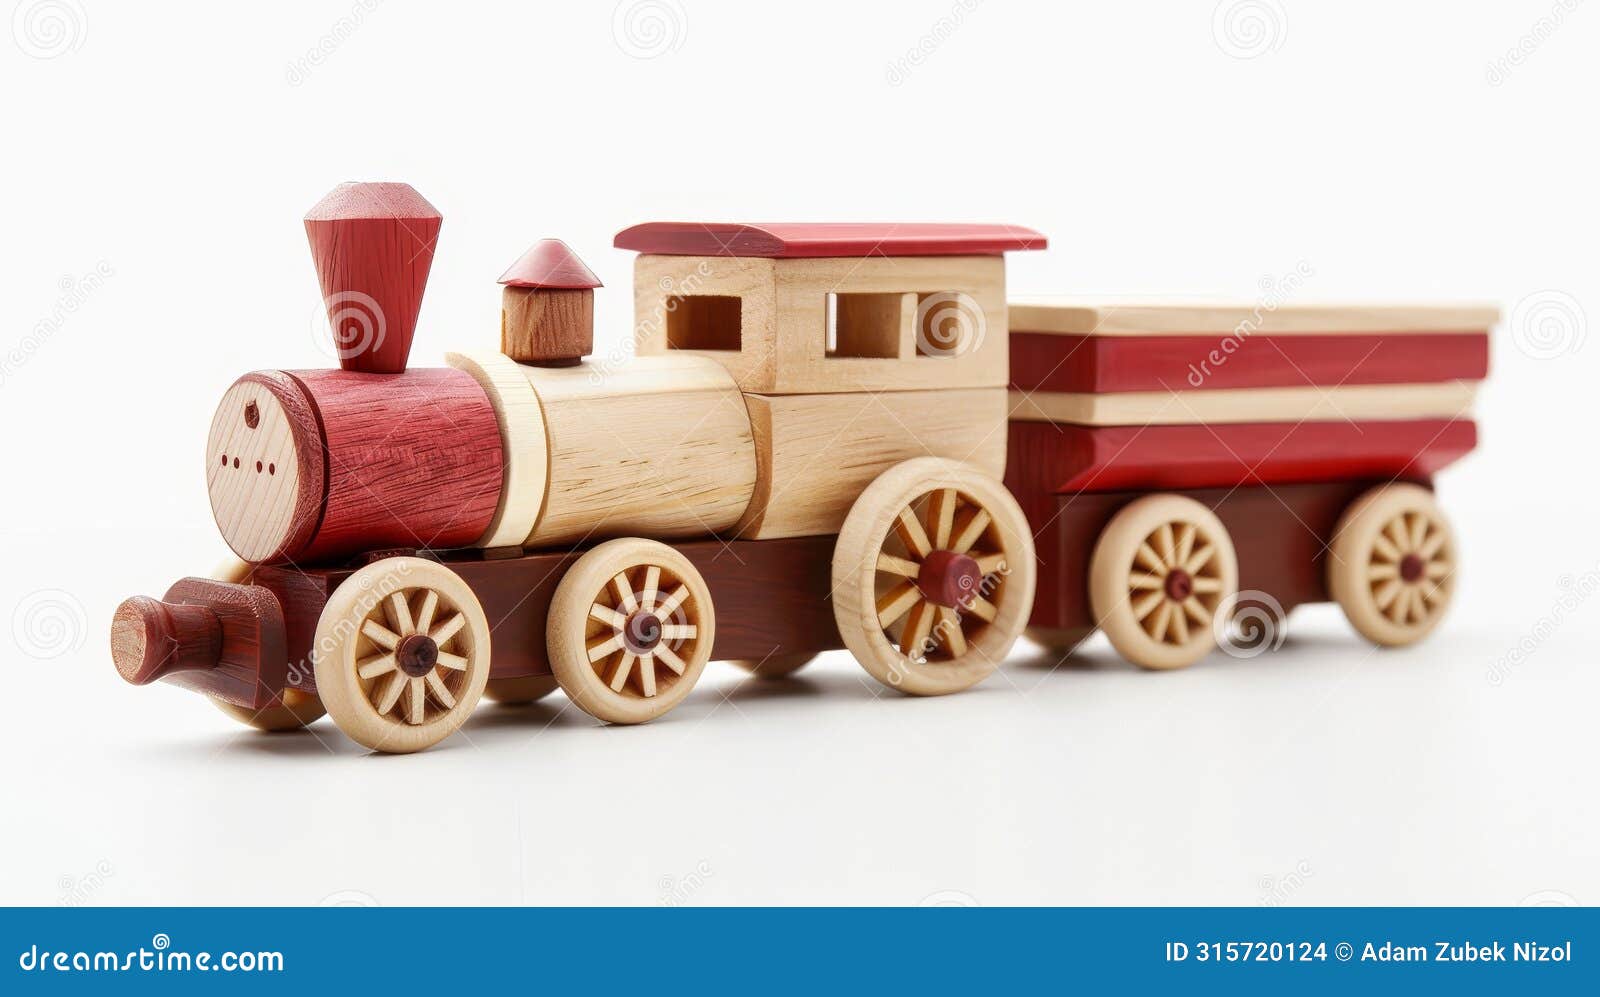 wooden toy train with carriages